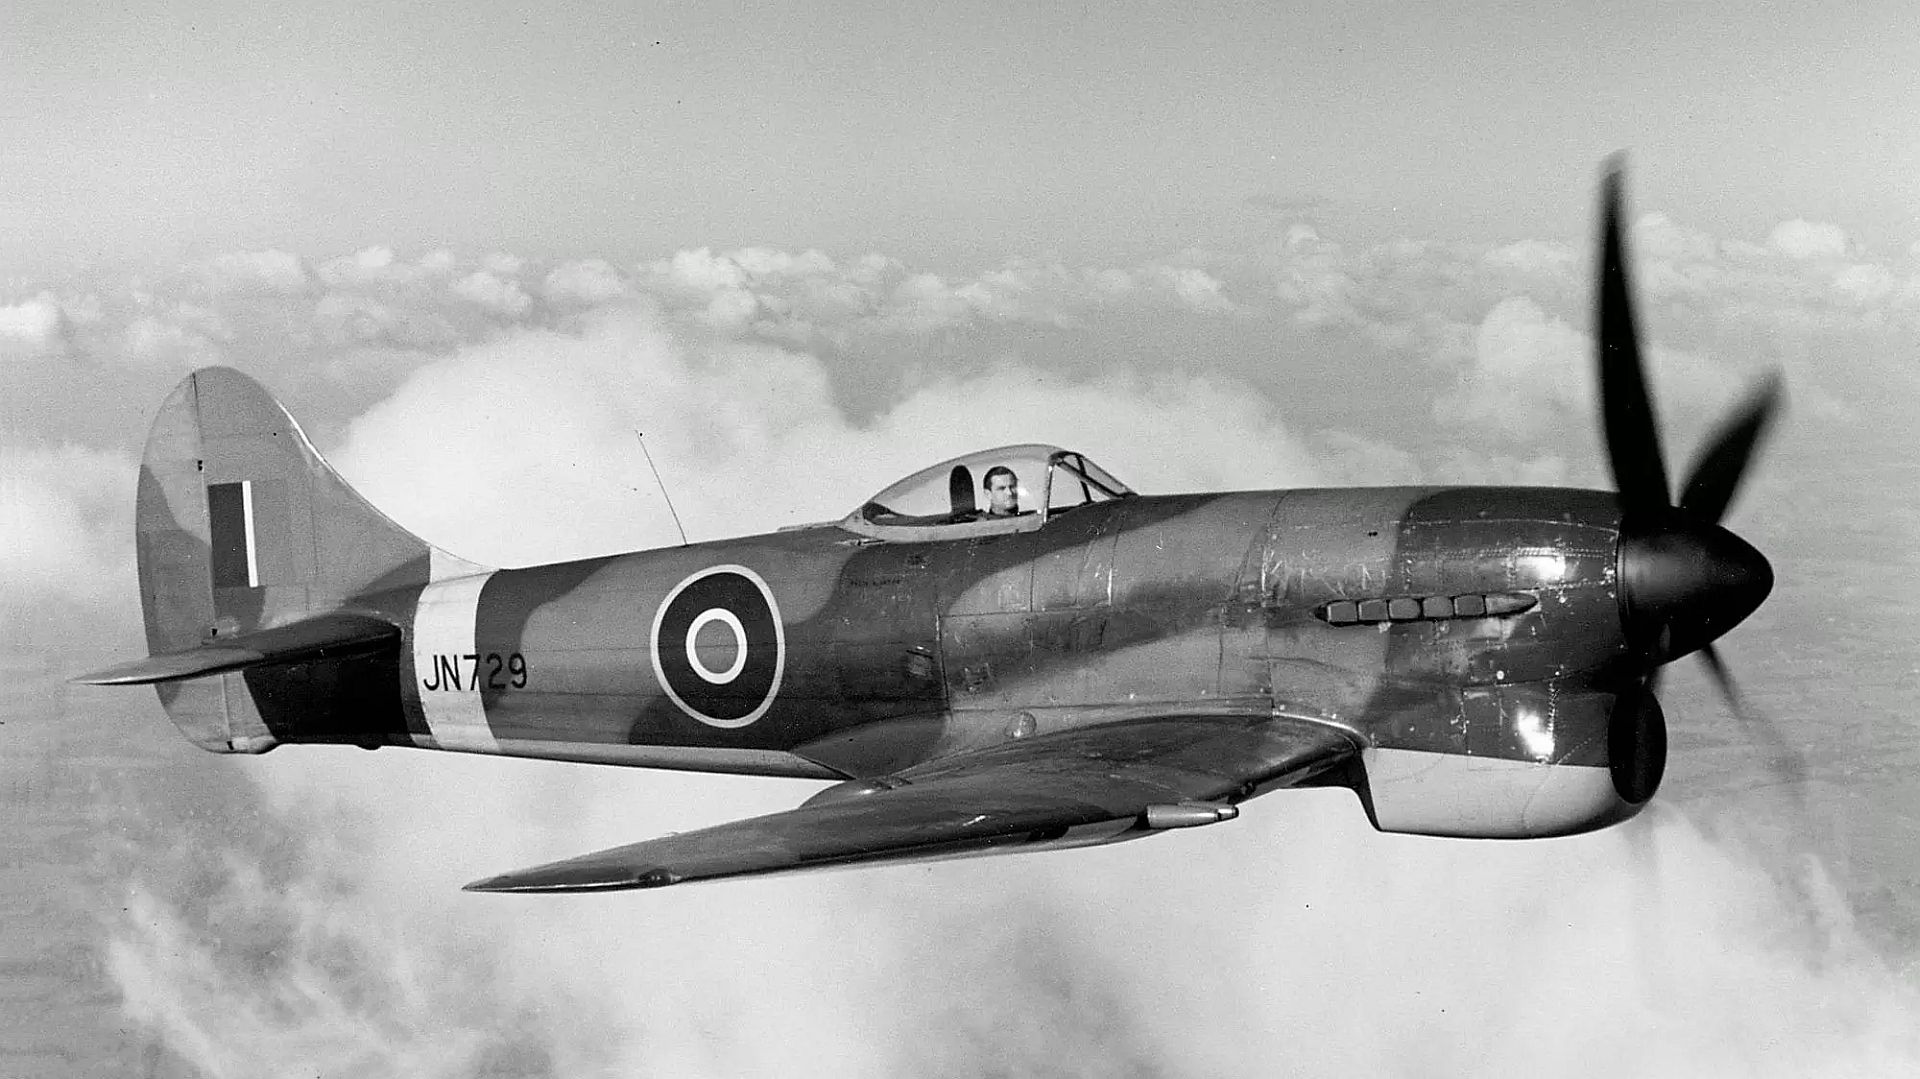 JN729 Was The First Production Tempest V